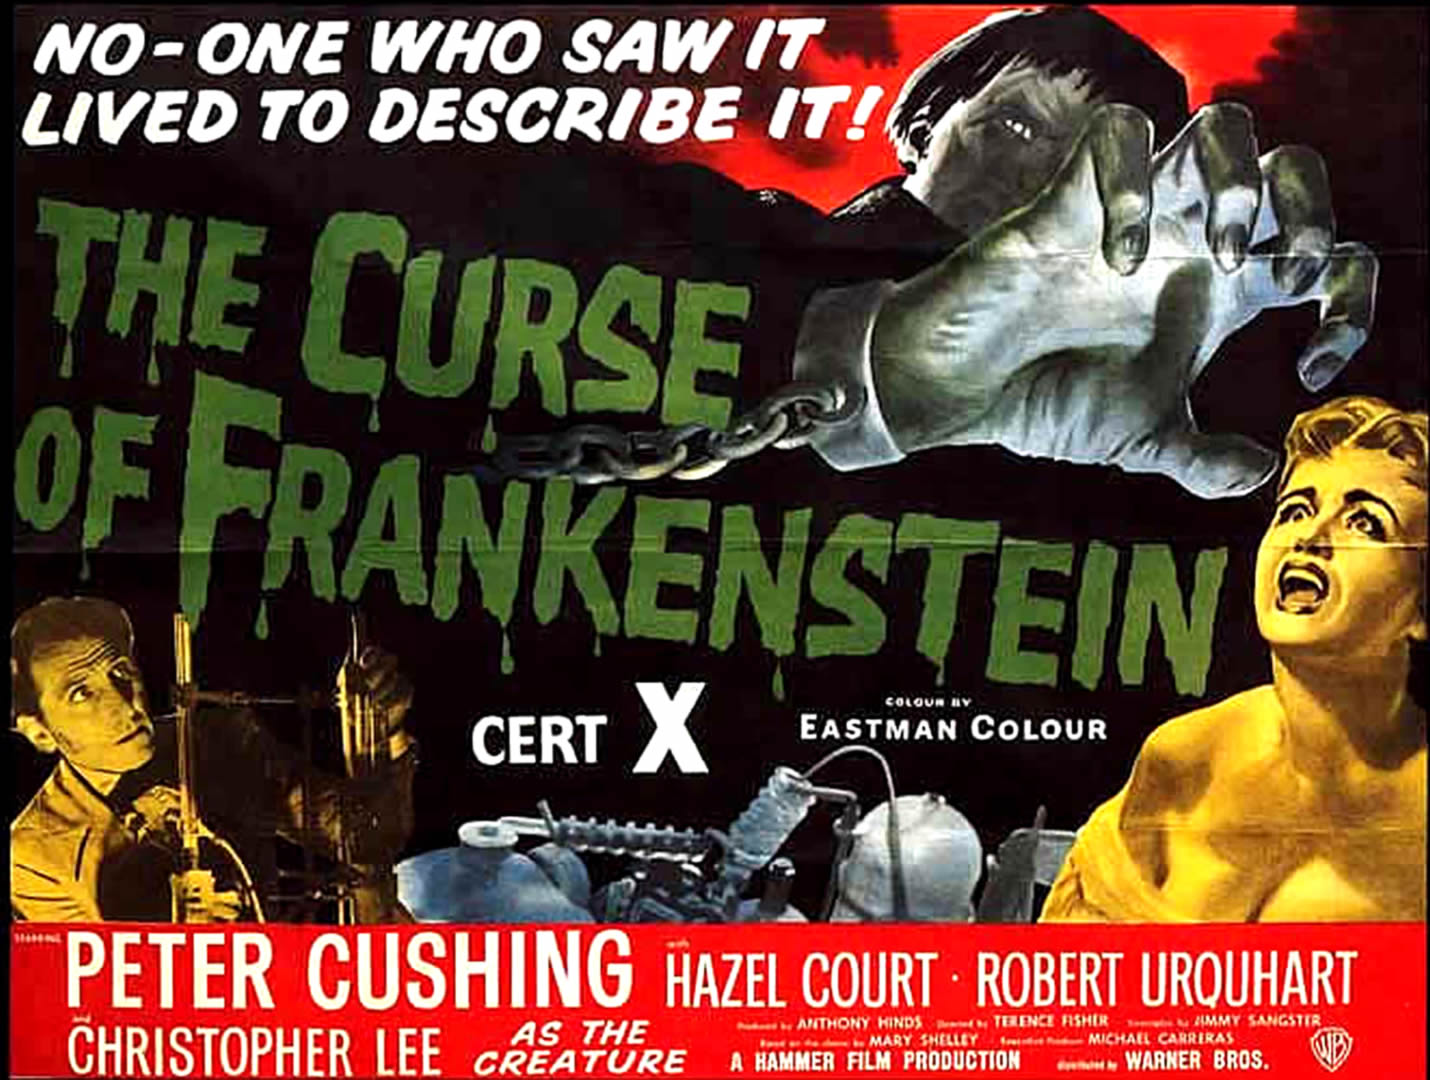 THE CURSE OF FRANKENSTEIN 4 - Monster B Movie Posters